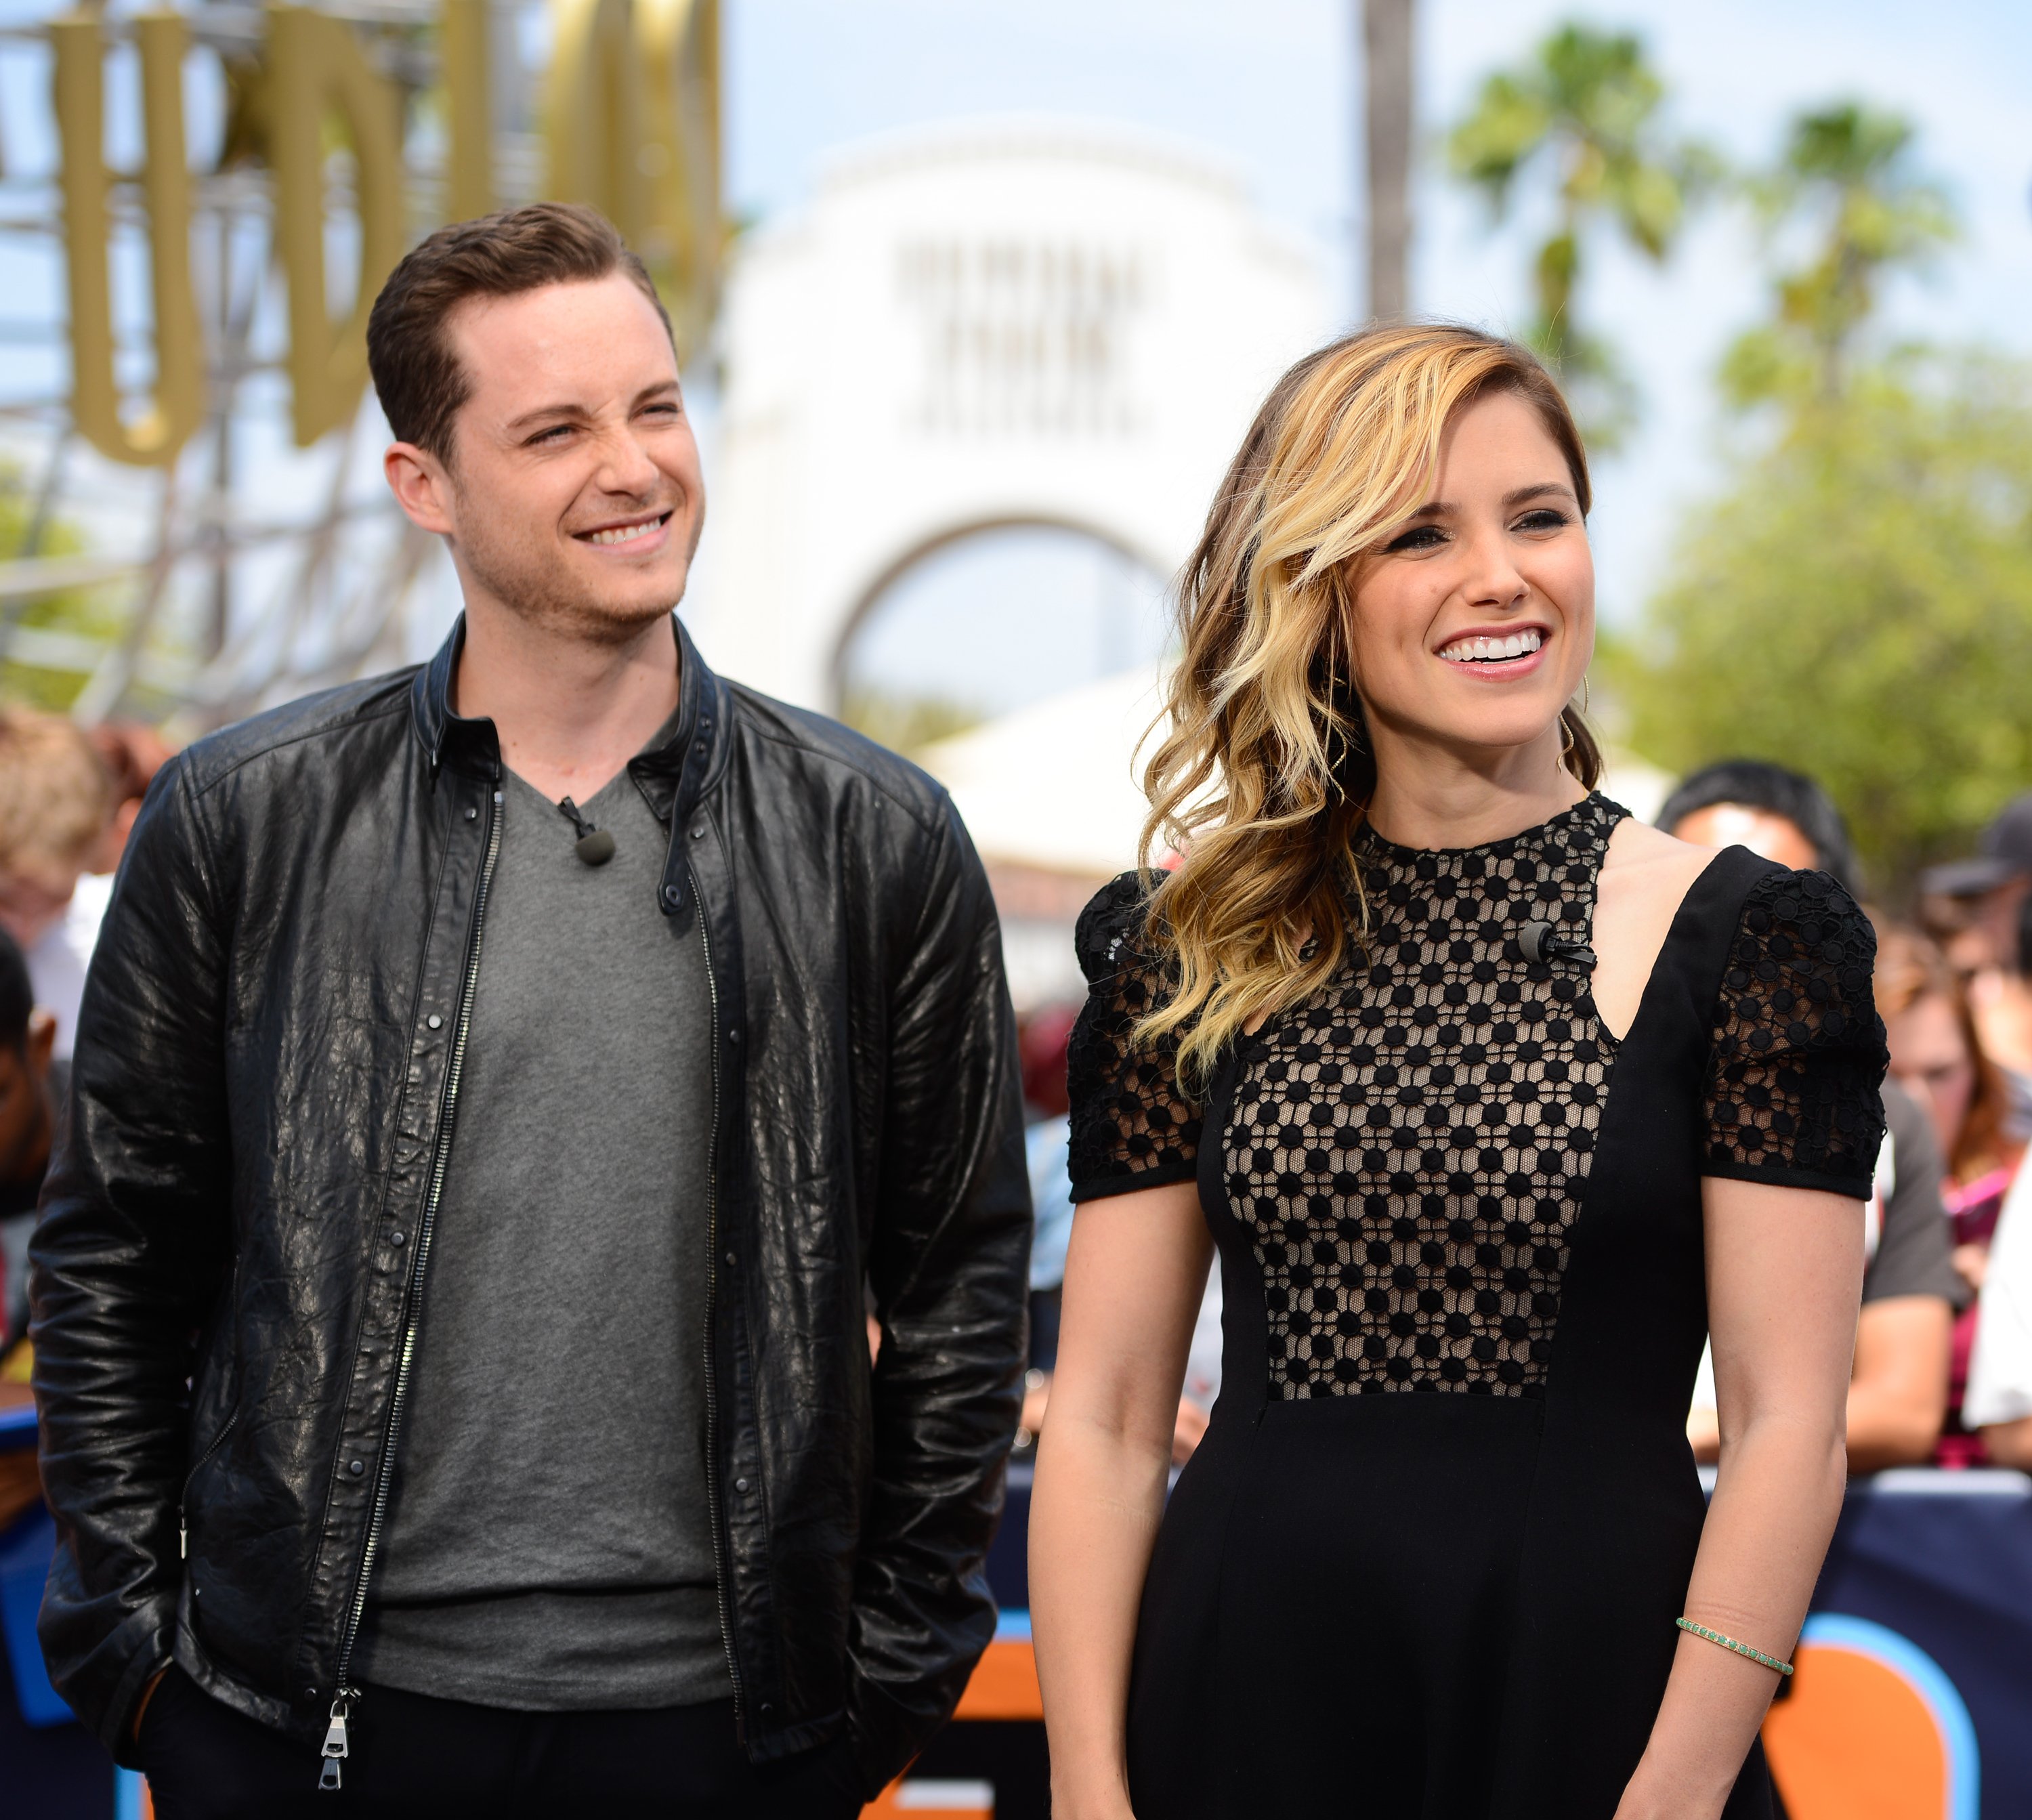 Jesse Soffer and Sophia Bush at "Extra" on May 19, 2014 in Universal City, California. | Source: Getty Images